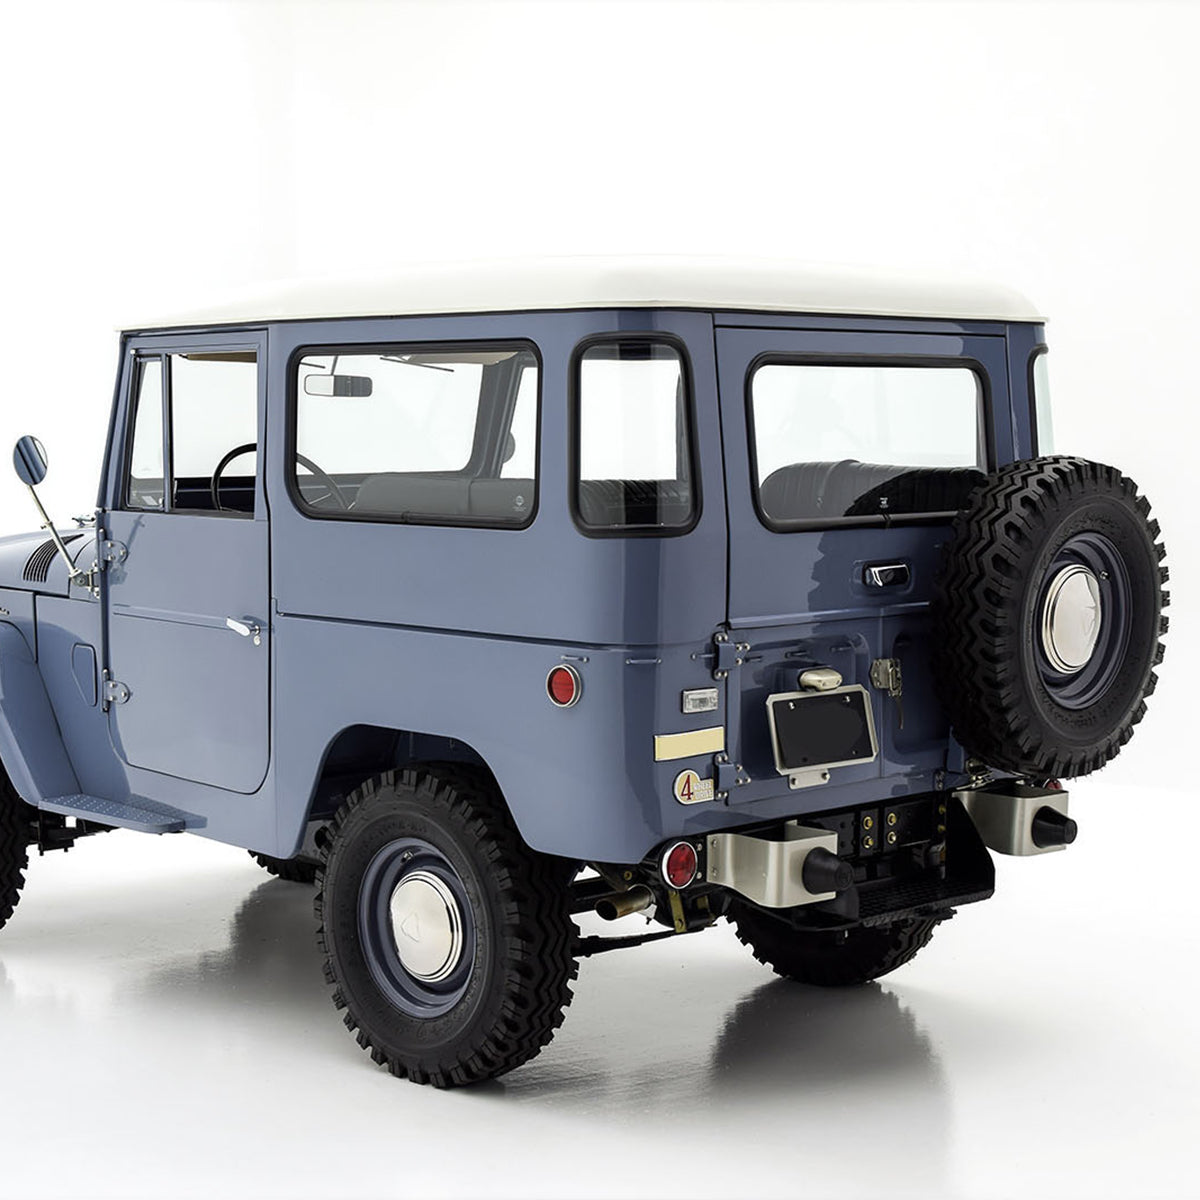 Barn Doors (Tailgate lower) LH and RH, for FJ40 Toyota Land Cruiser with RIGHT hand side spare tire rack, before 1975